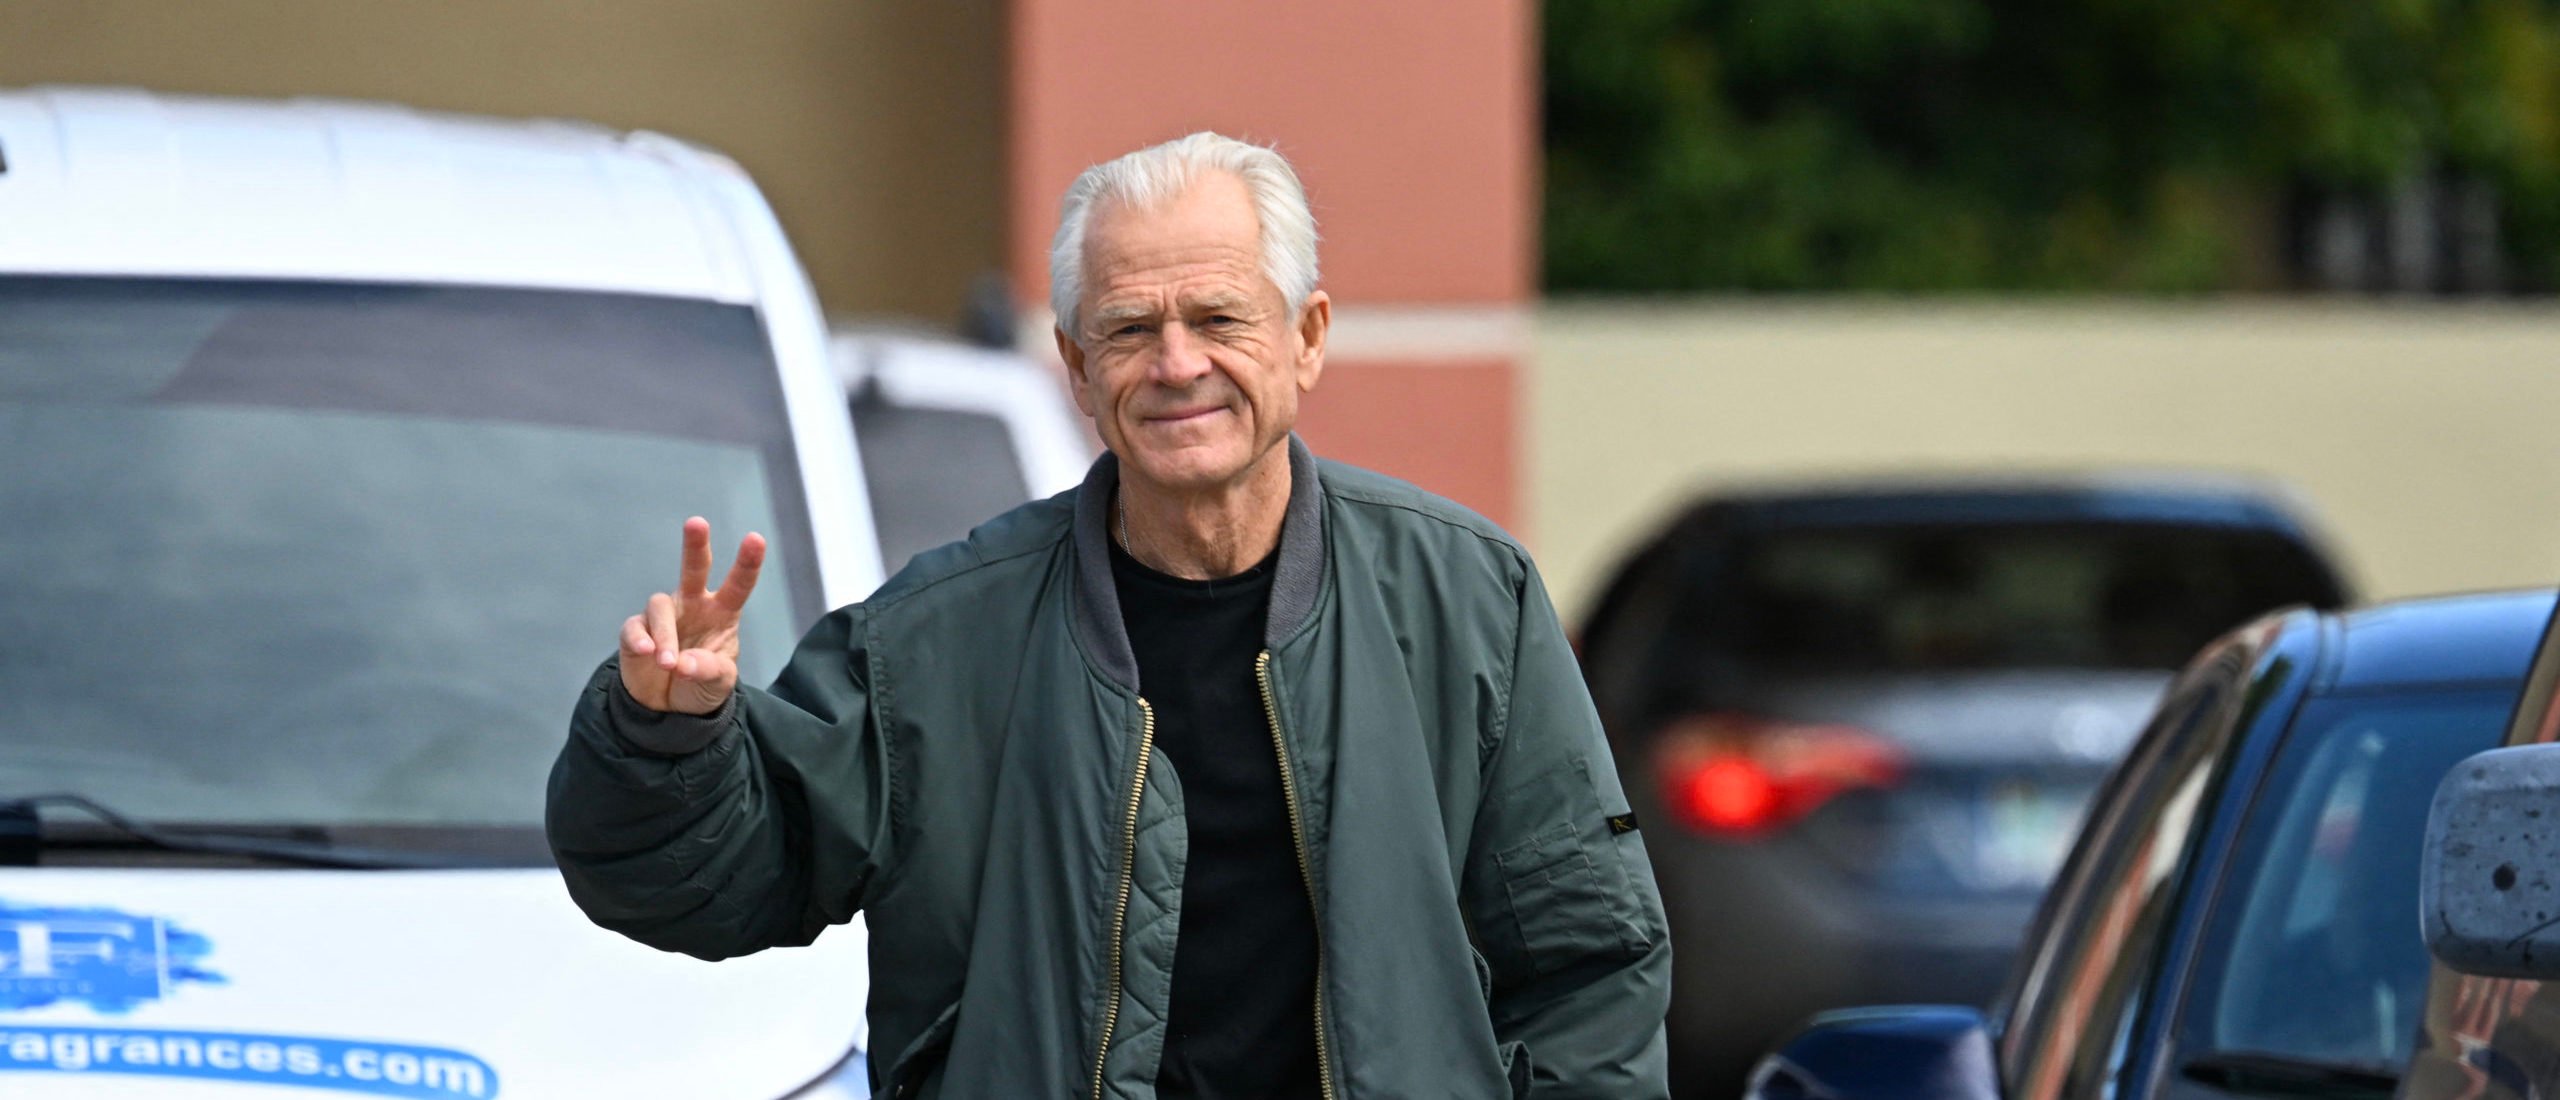 Peter Navarro, White House trade advisor to former US President Donald Trump, arrives to speak to the press at the Country Mall Plaza before reporting to the Federal Correctional Institution, in Miami, Florida on March 19, 2024. Navarro, 74, was found guilty of two counts of contempt in September for refusing to testify before the congressional panel that investigated the January 6, 2021, attack on the US Capitol. (Photo by CHANDAN KHANNA / AFP) (Photo by CHANDAN KHANNA/AFP via Getty Images)